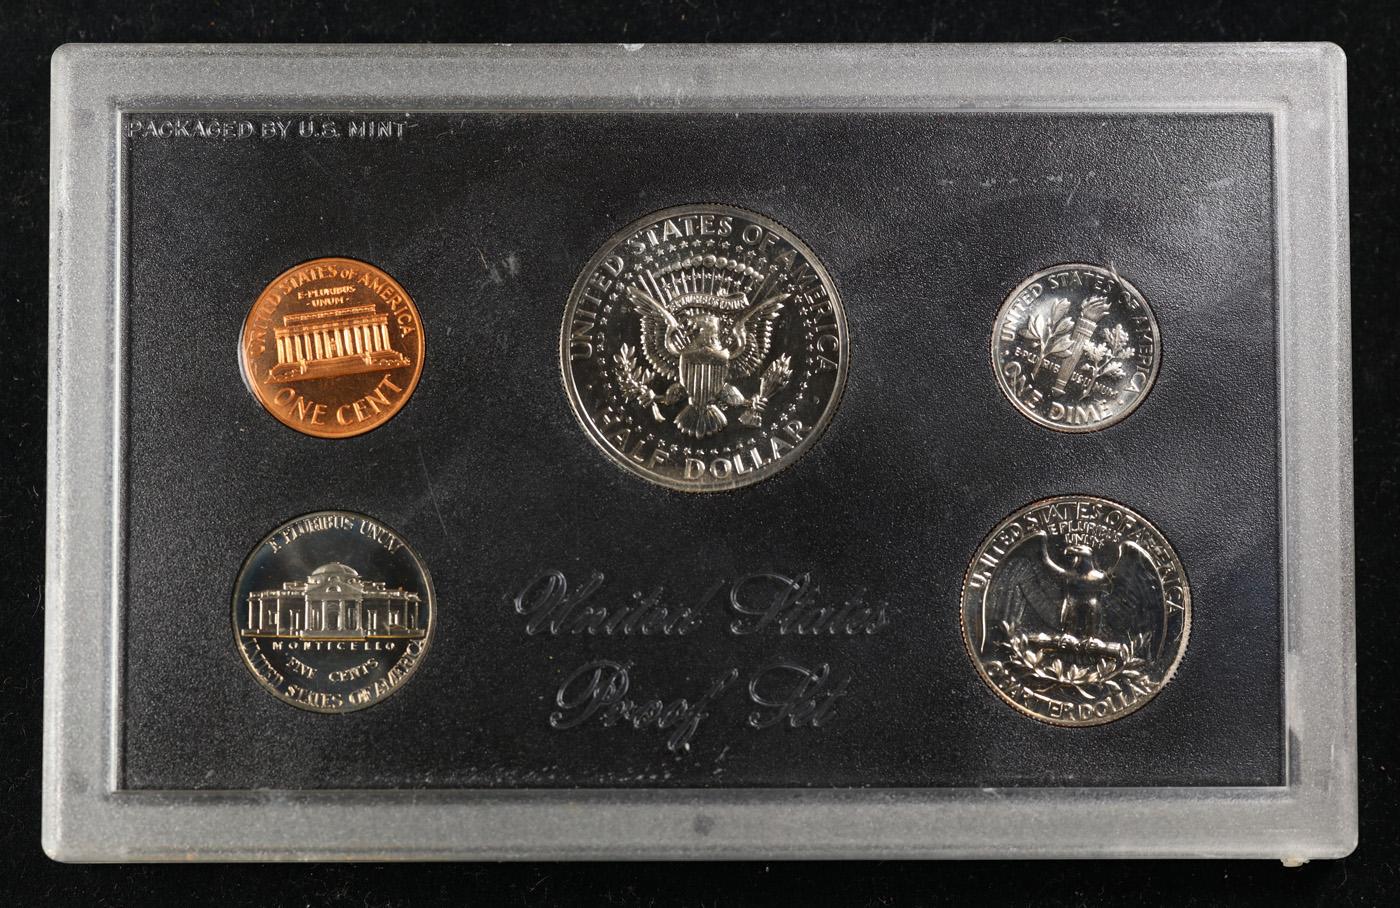 1971 United States Mint Proof Set 5 Coins - No Outer Box